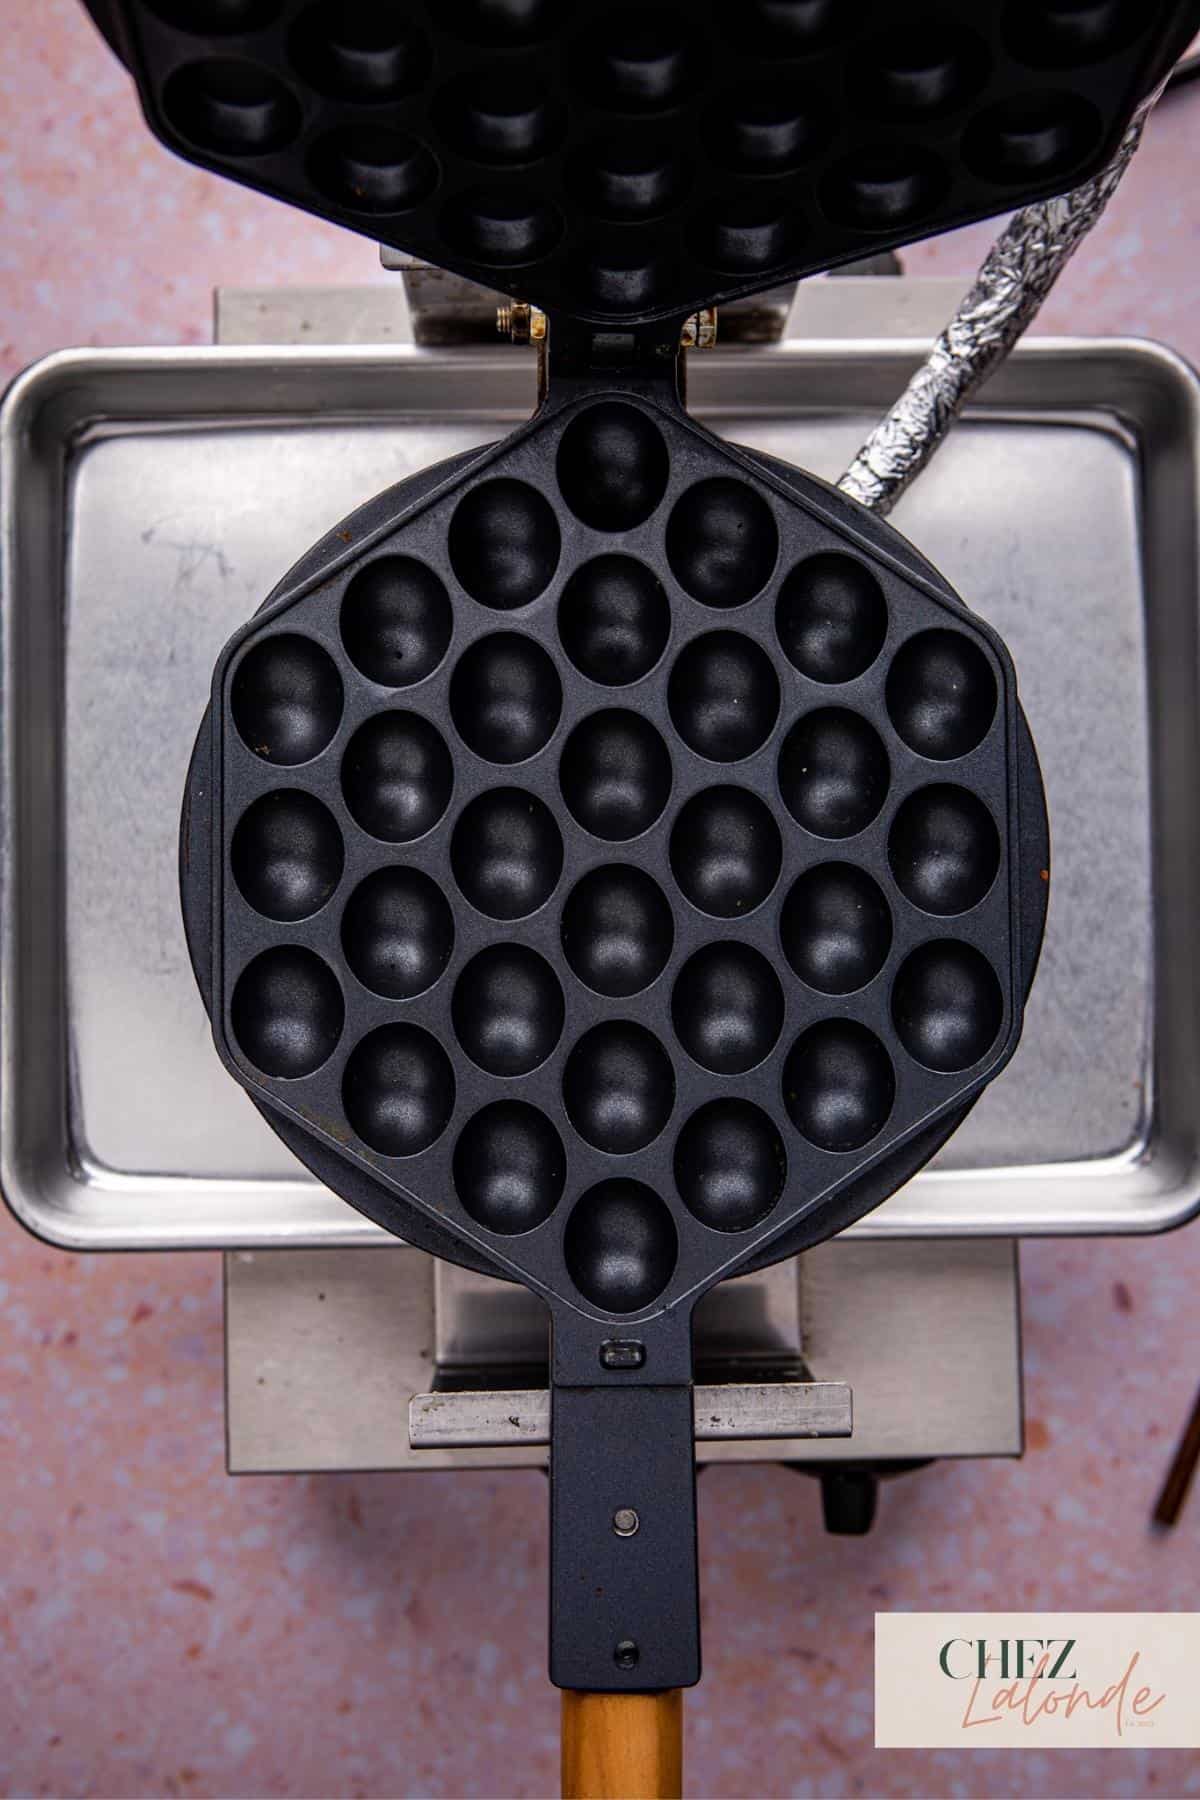 Step2: Once it is heated, open up the waffle iron.